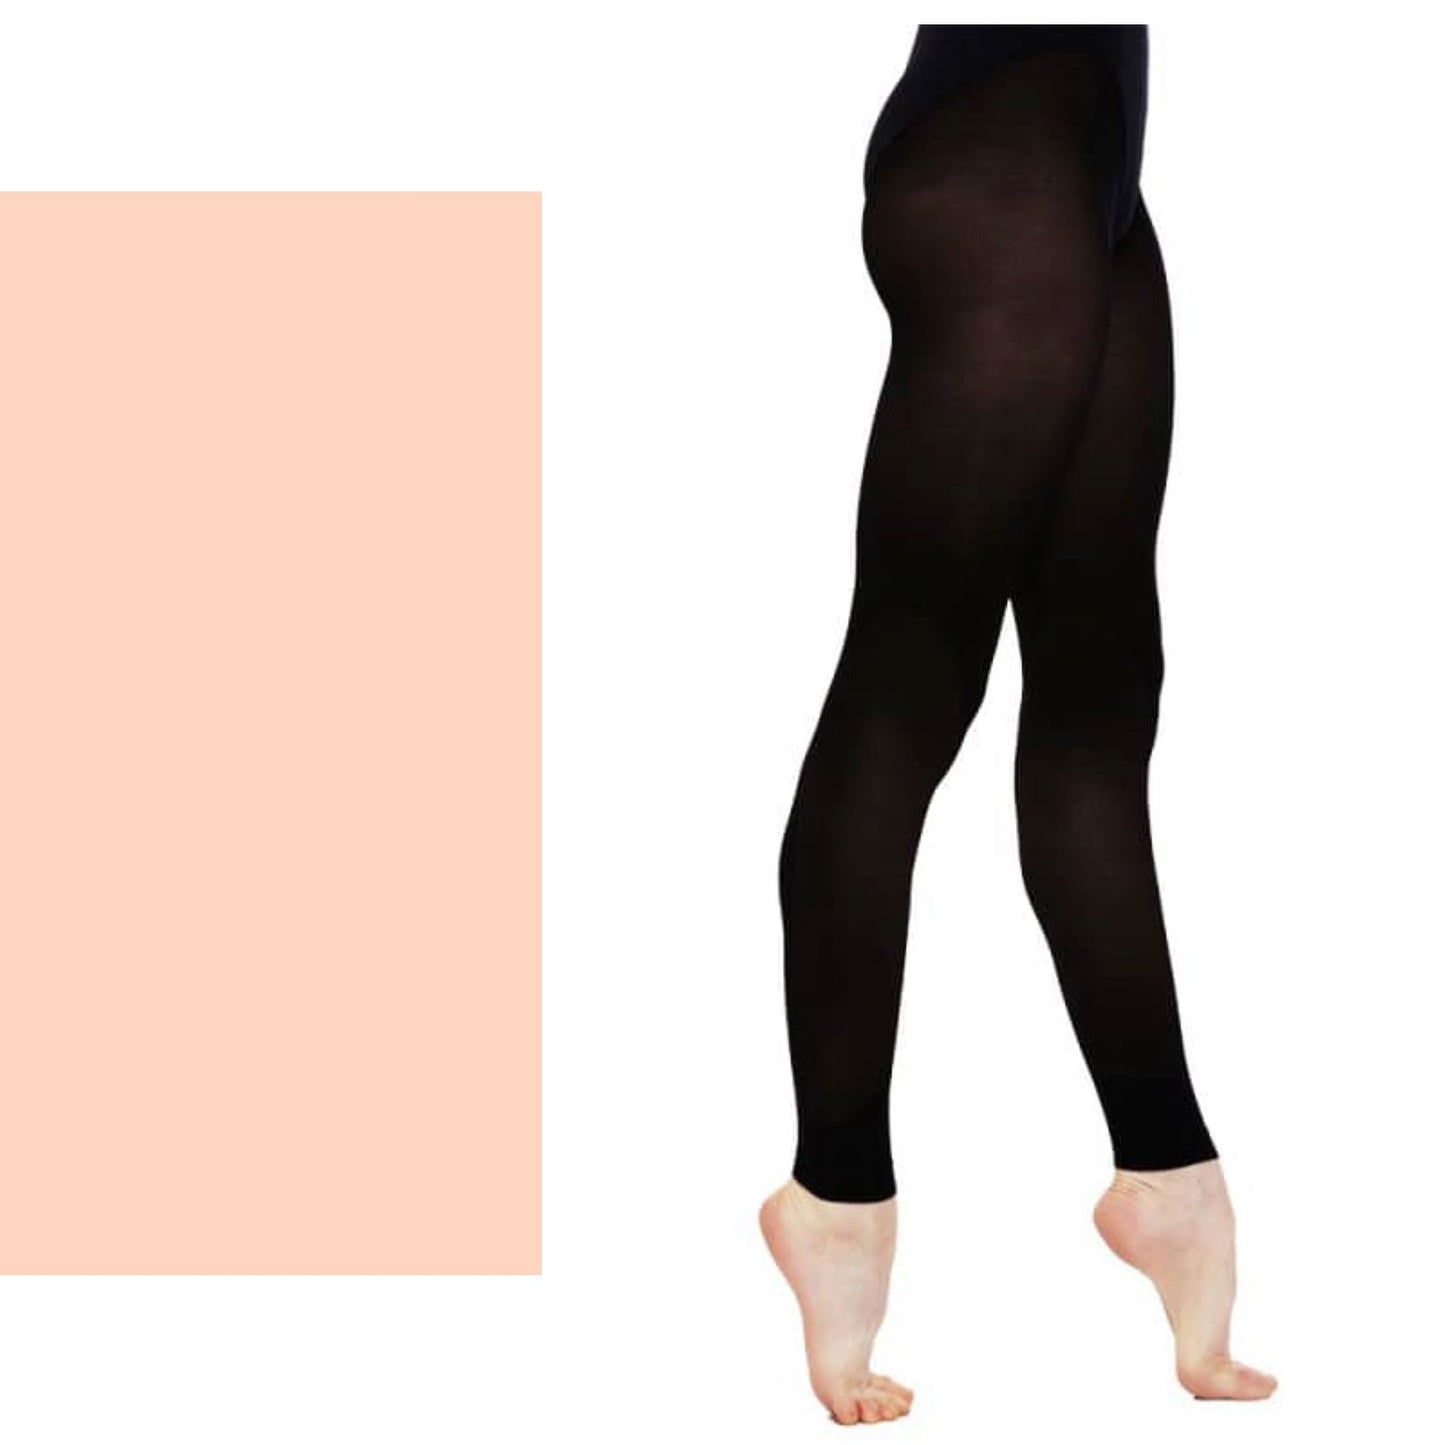 'SILKY' BRAND 60 DENIER BALLET DANCE FOOTLESS TIGHTS Tights & Socks Silky Theatrical Pink Age 3-5 